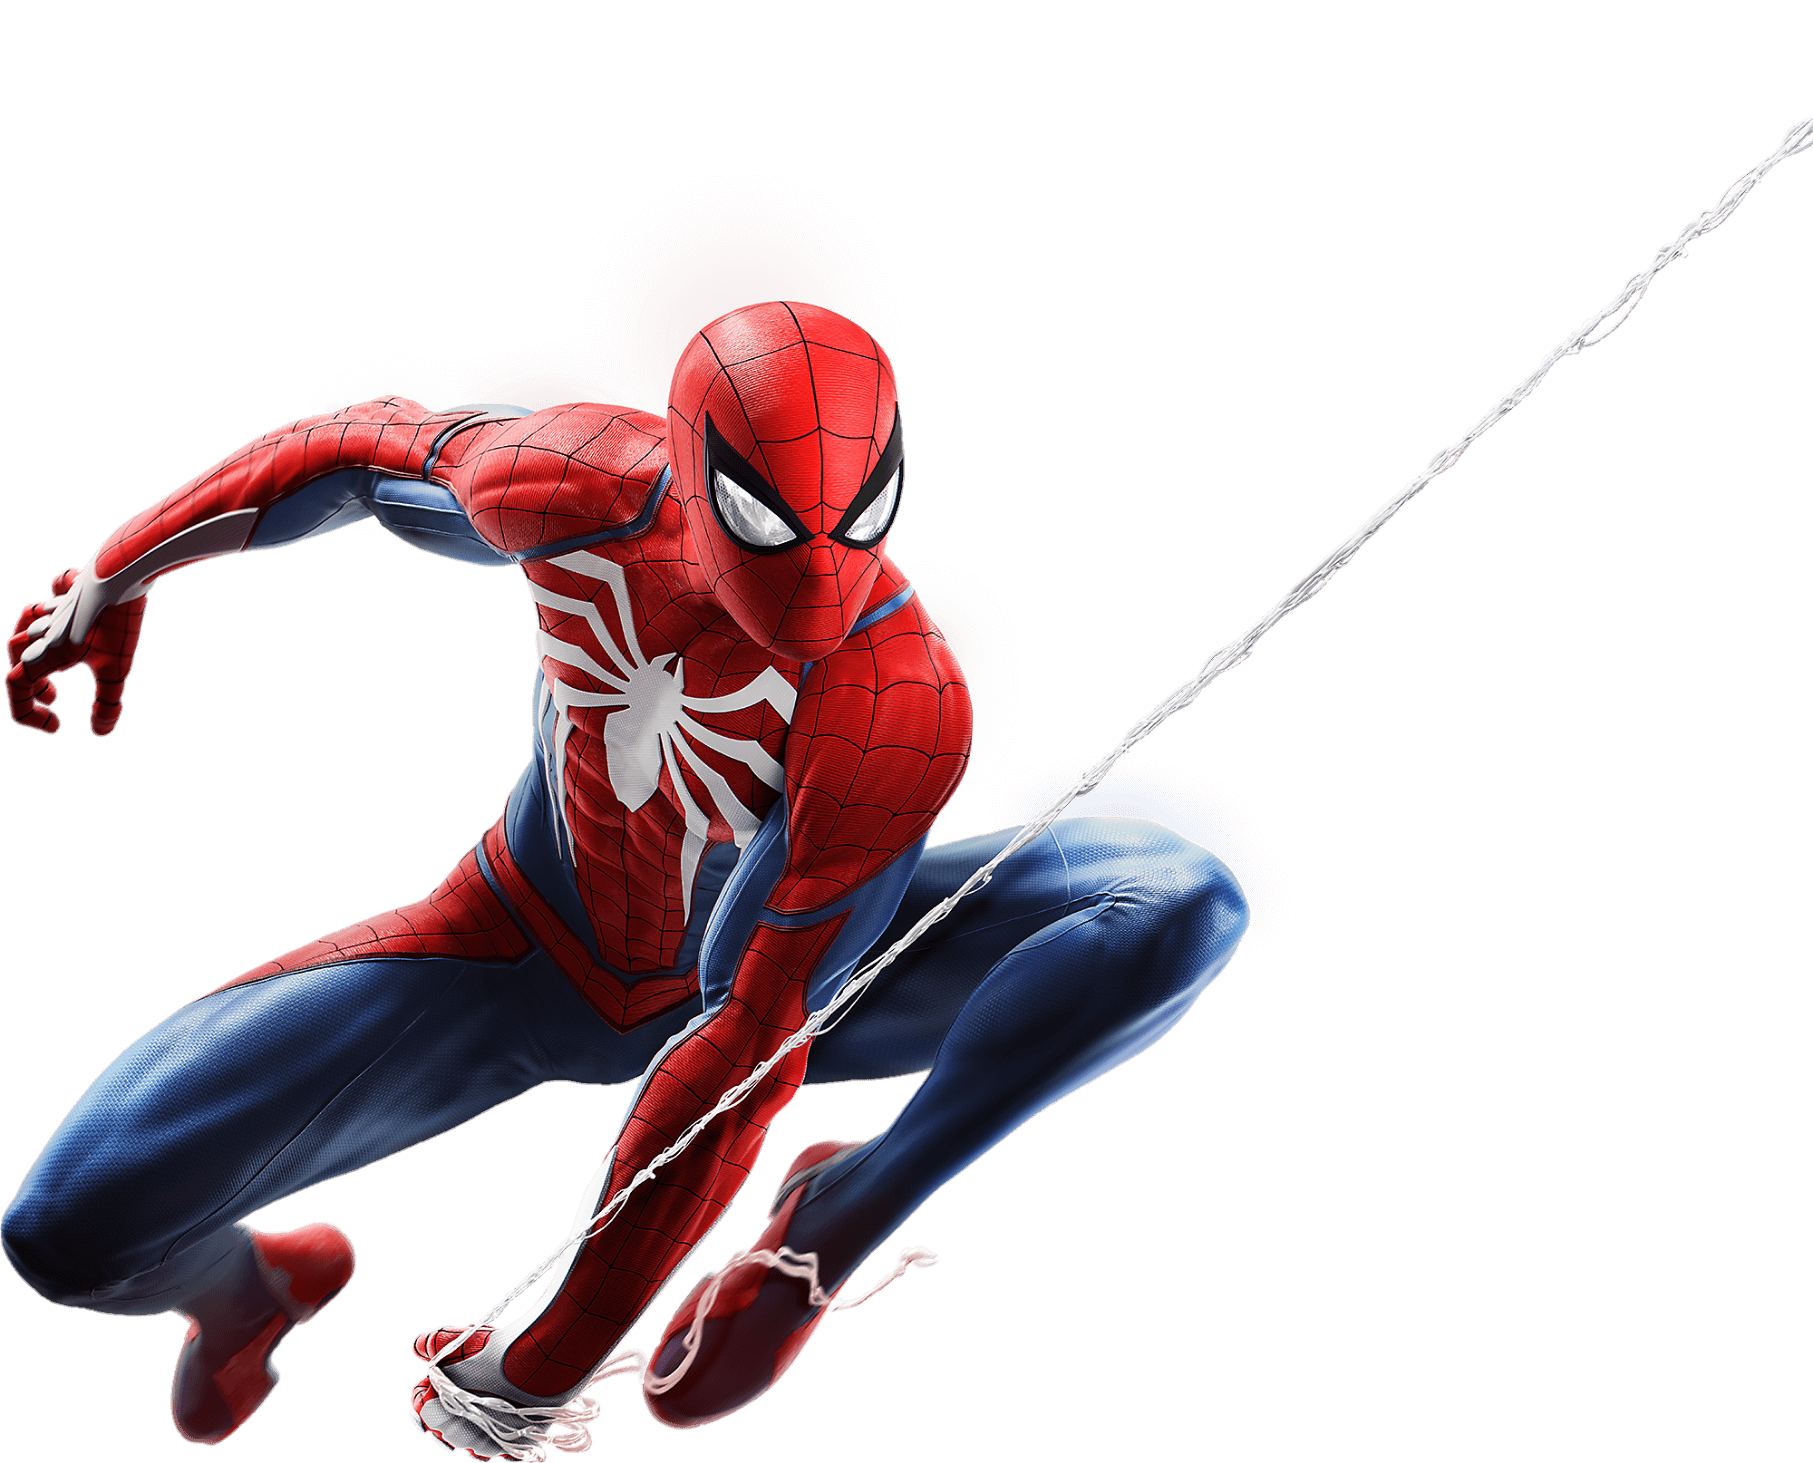 spider-man-png-from-pngfre-44-1